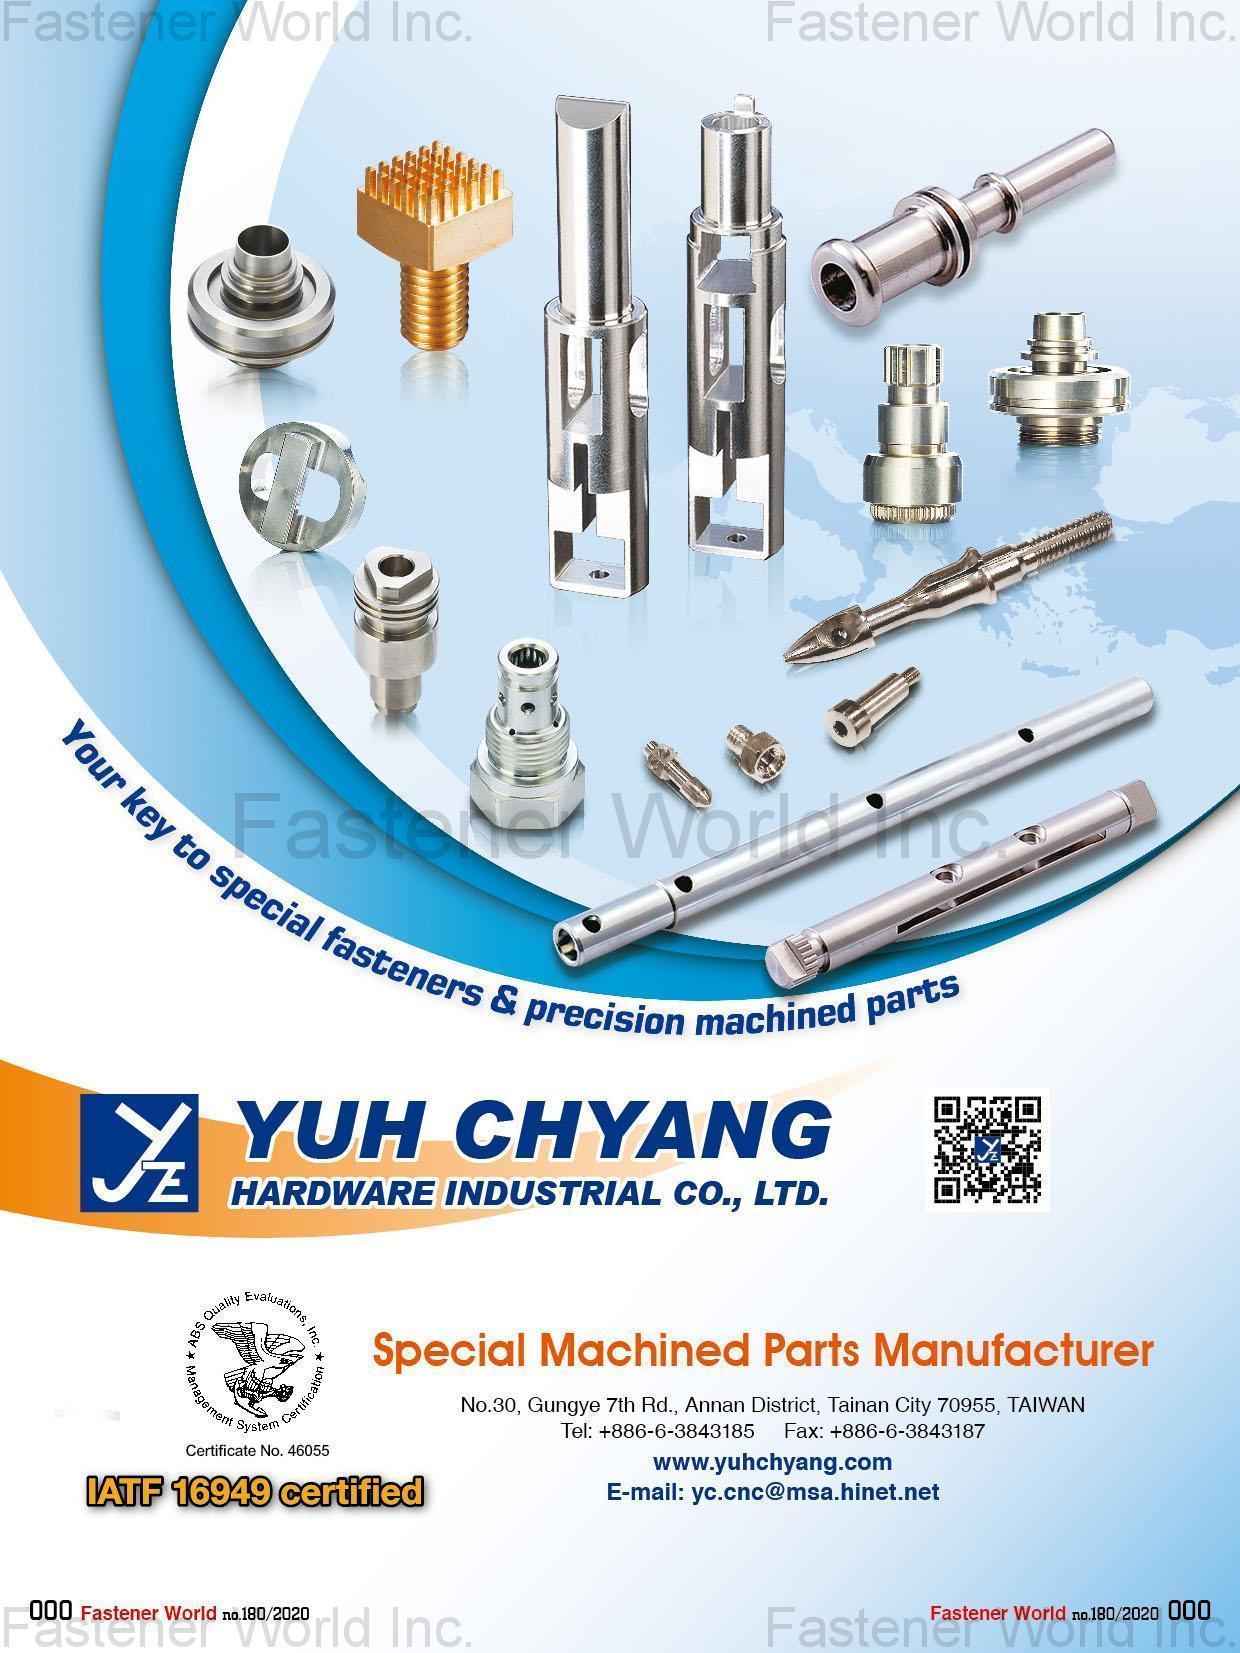 Special Parts Manufacturer of Special Machined Parts